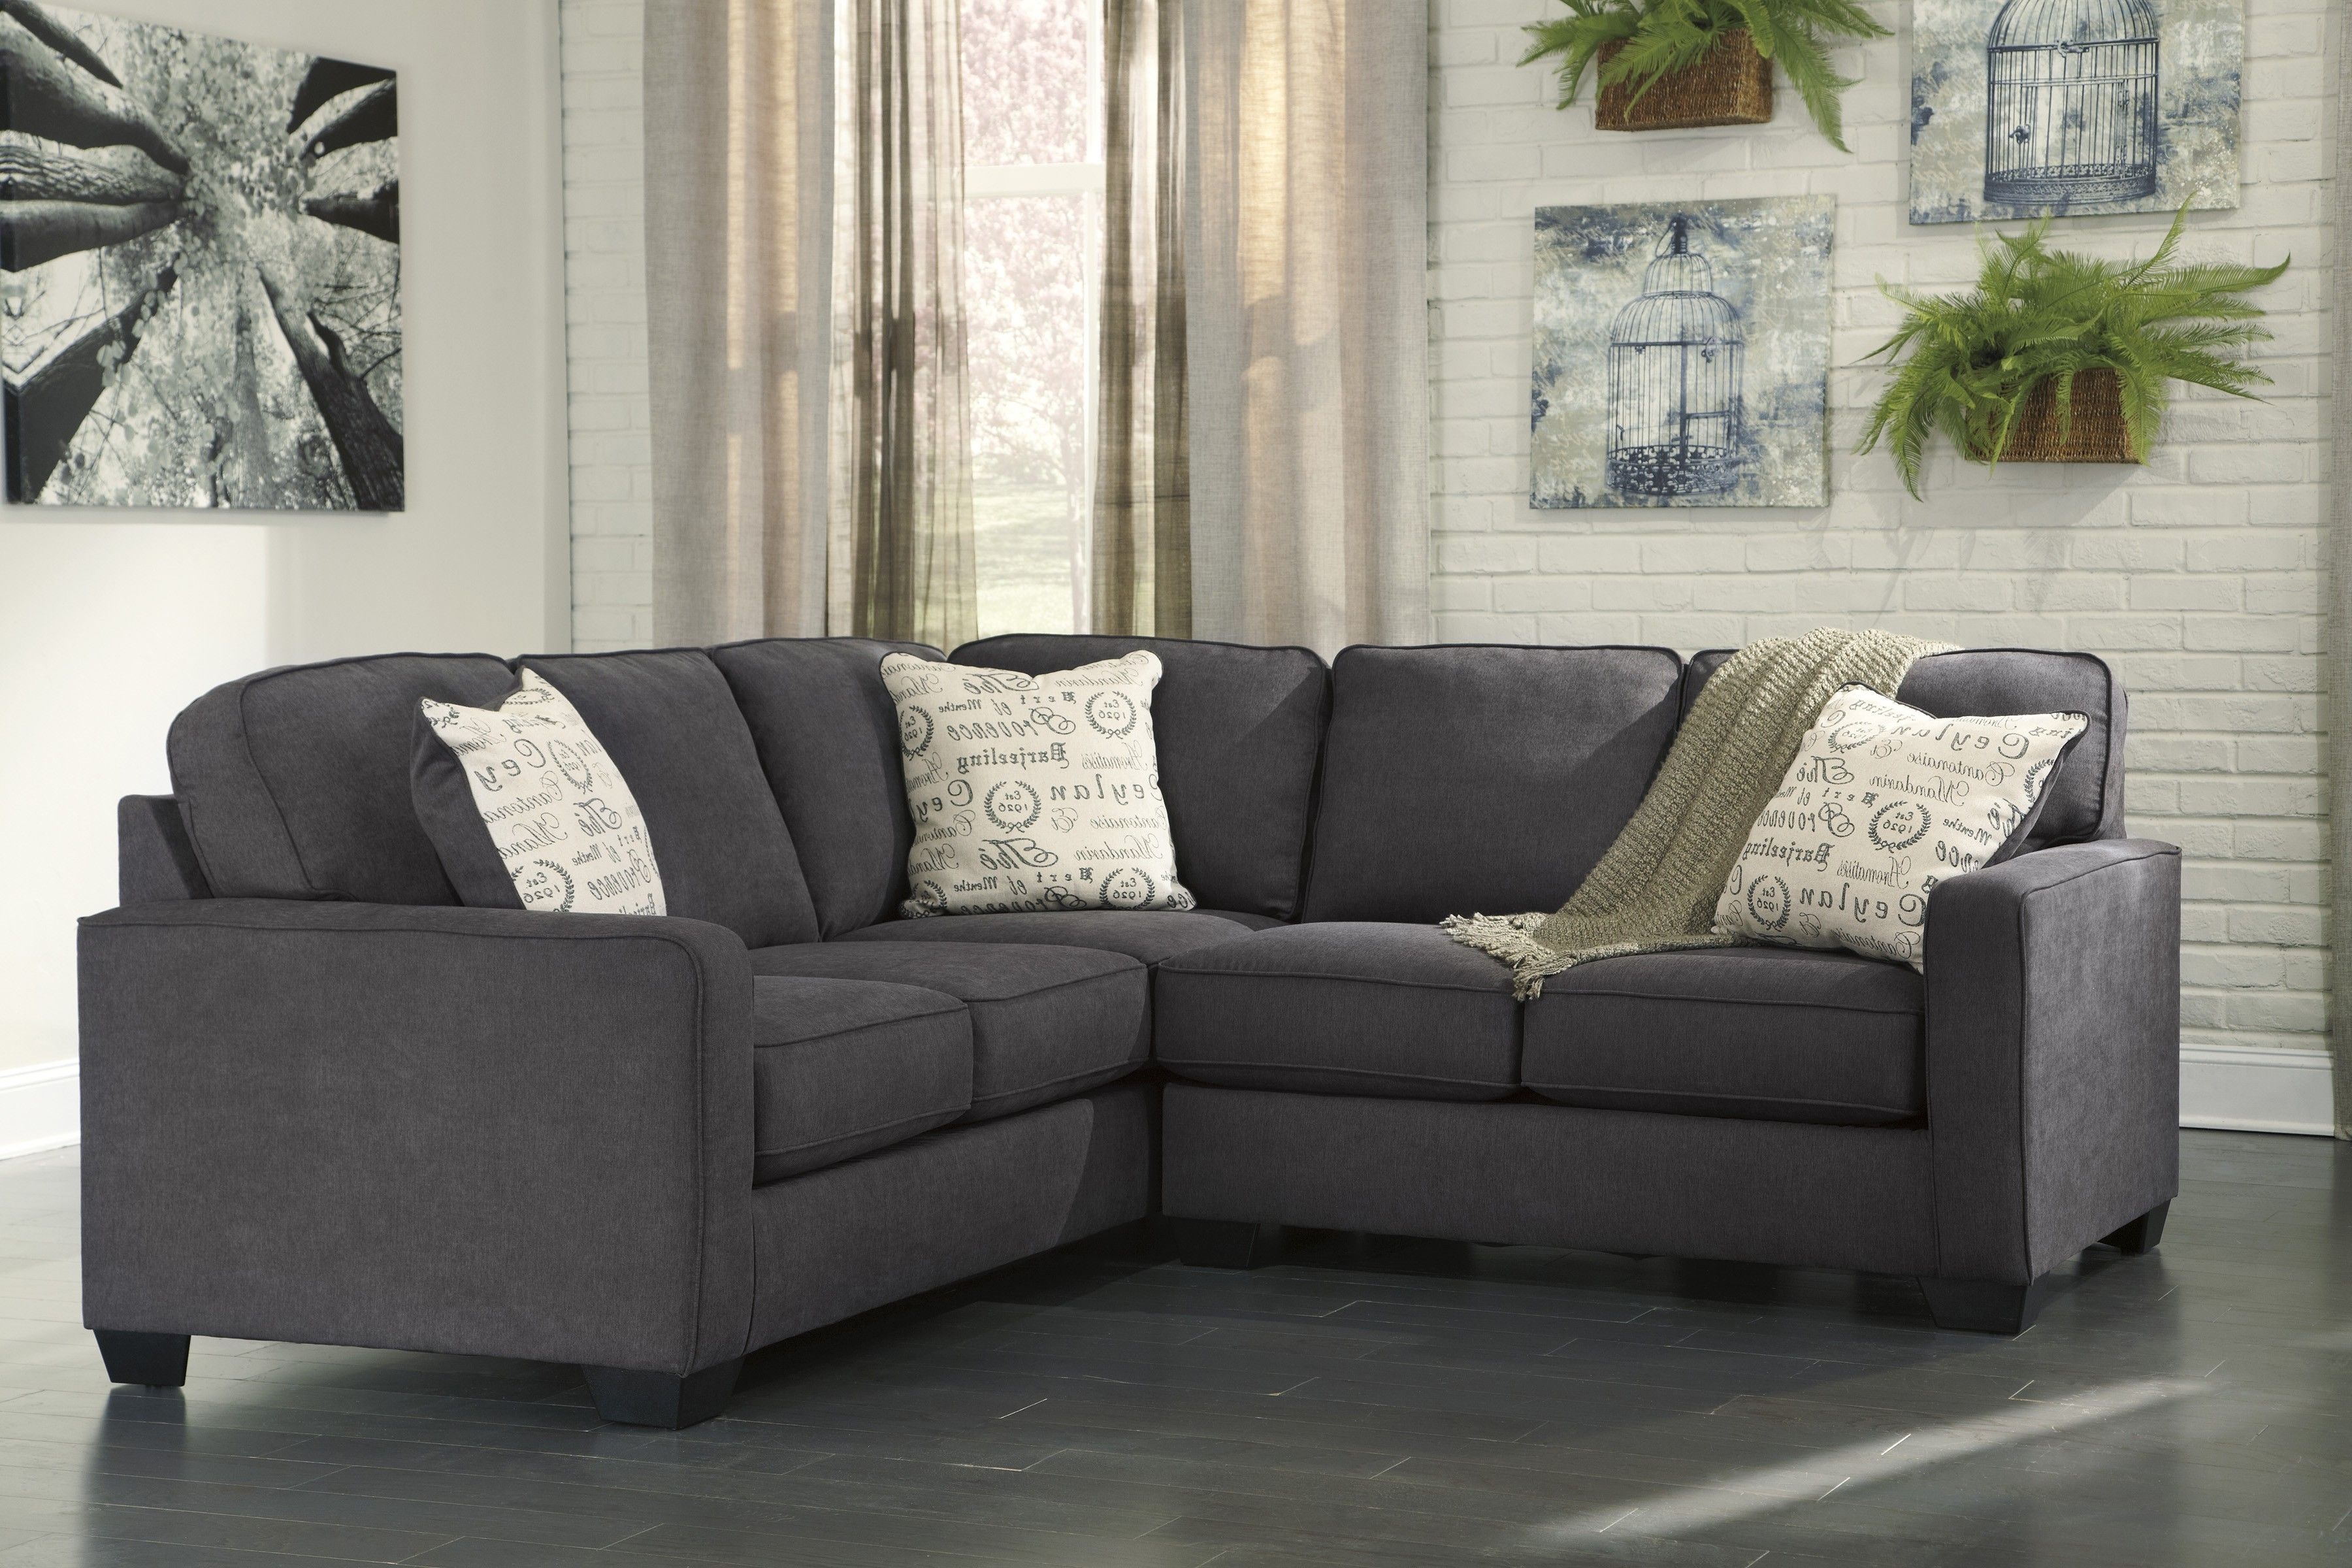 Alenya Charcoal Piece Sectional Sofa For Furnitureusa Raf Love Tures Throughout Aspen 2 Piece Sleeper Sectionals With Laf Chaise (View 14 of 30)